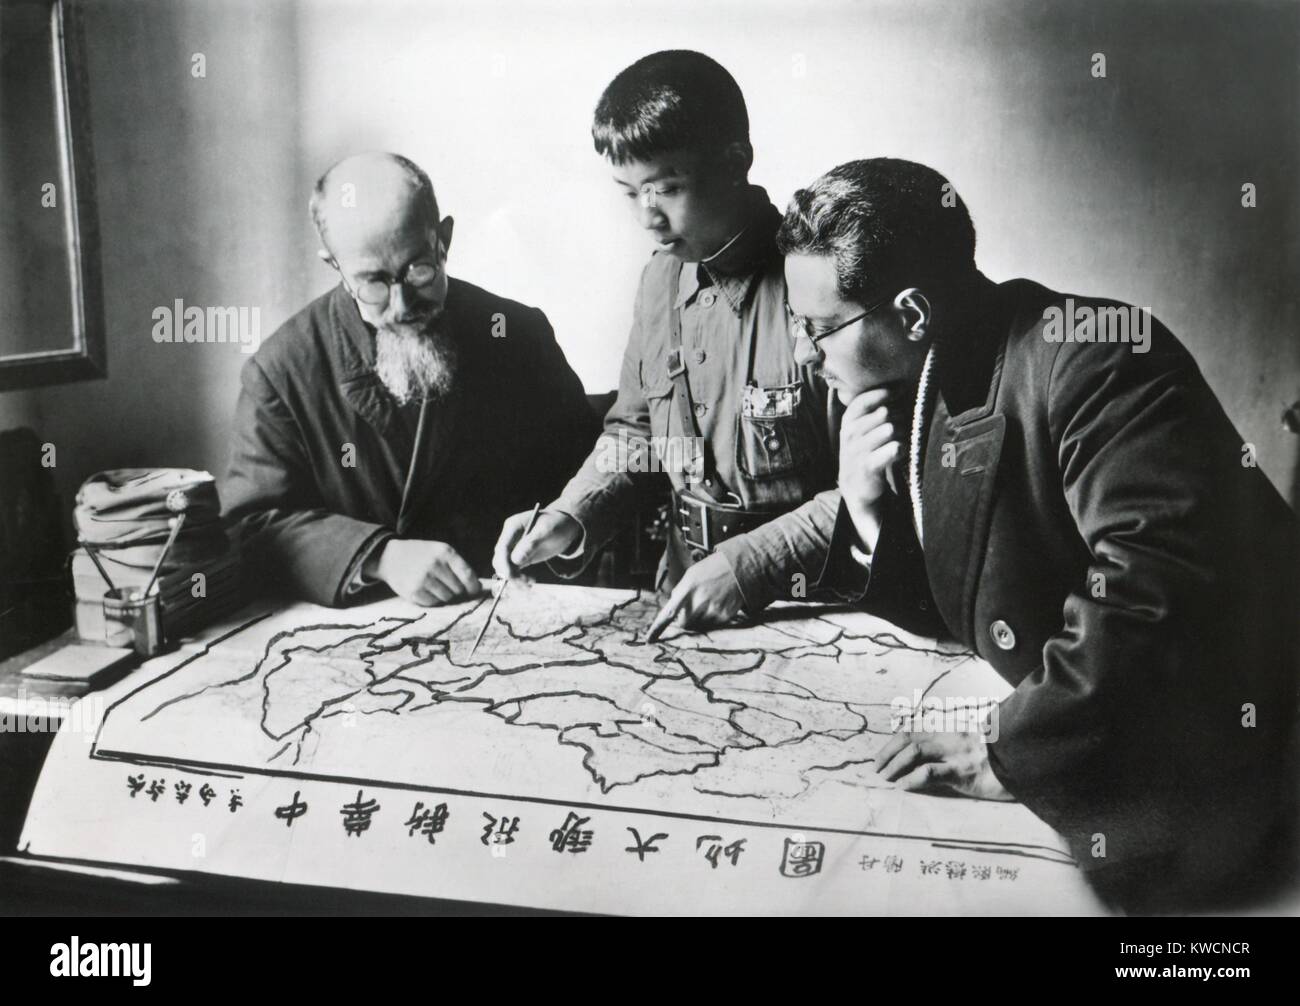 Chinese army officer and two missionaries plot the advance of Communist forces. Christian missions in the provinces of Hunan, Sichuan, Anhui, Jiangxi, Fujian, and Yunnan had fallen under Communist occupation. Nov. 1935. - (BSLOC 2014 15 155) Stock Photo